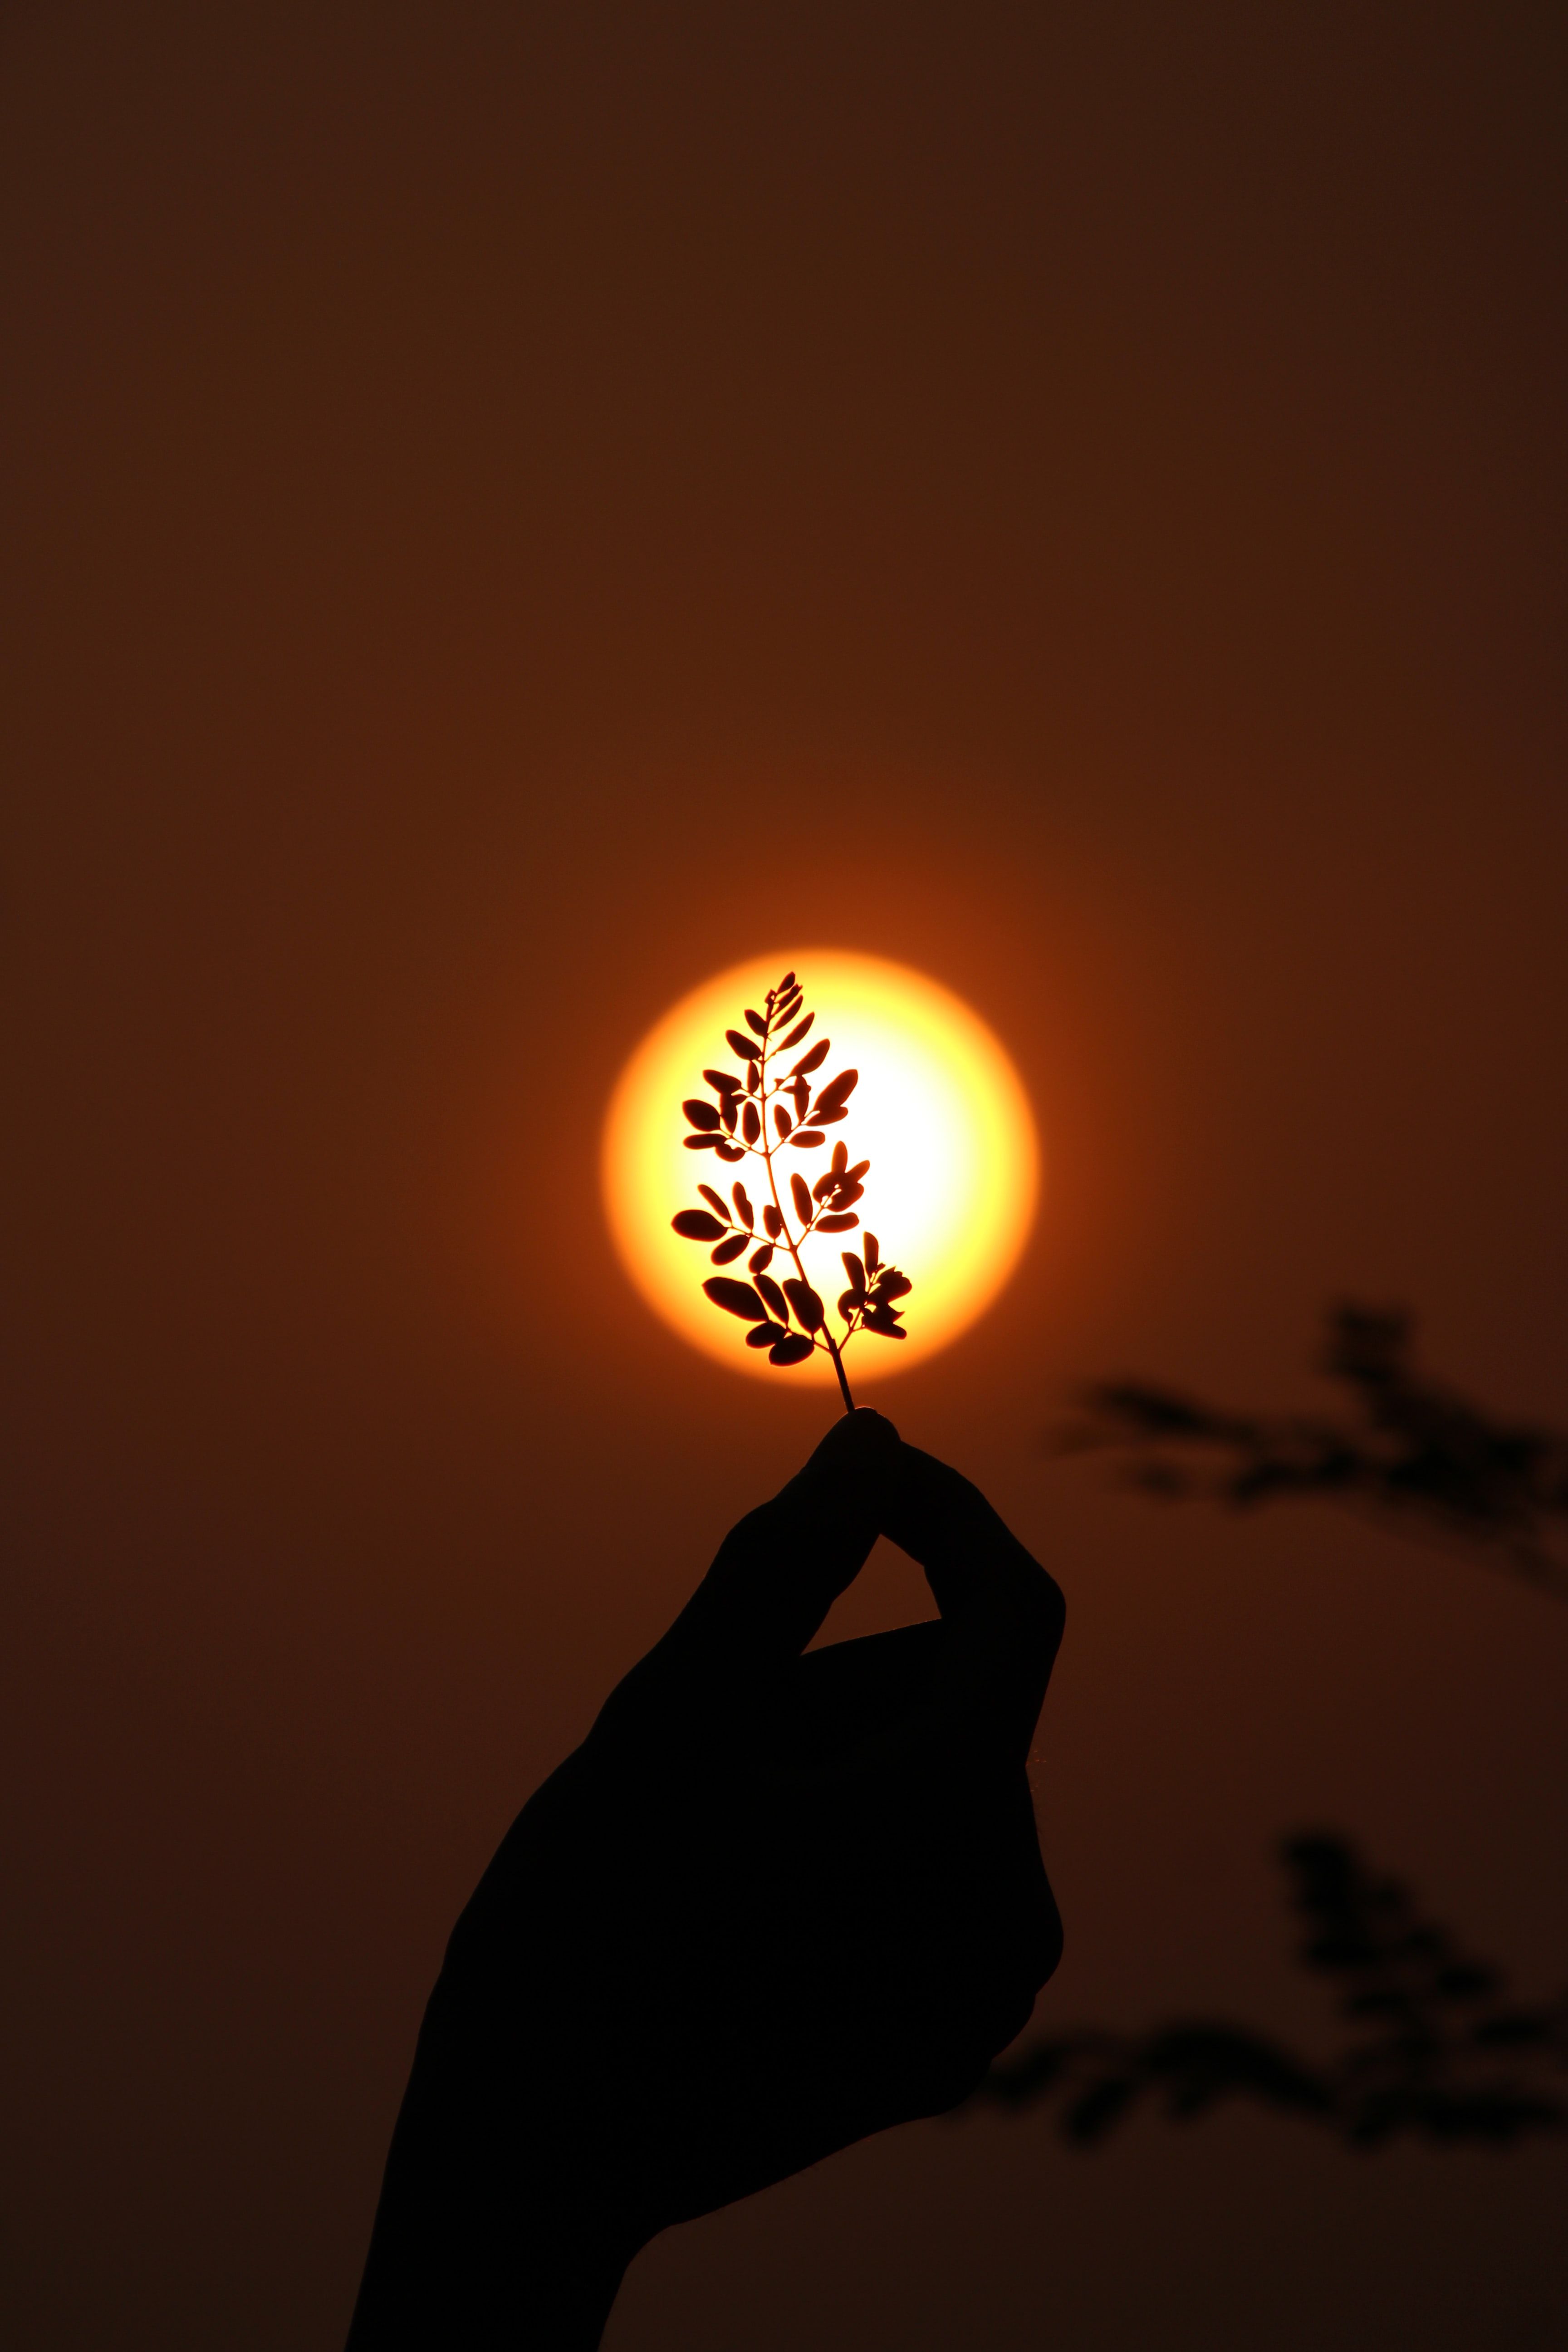 A person holding up something in front of the sun - Sun